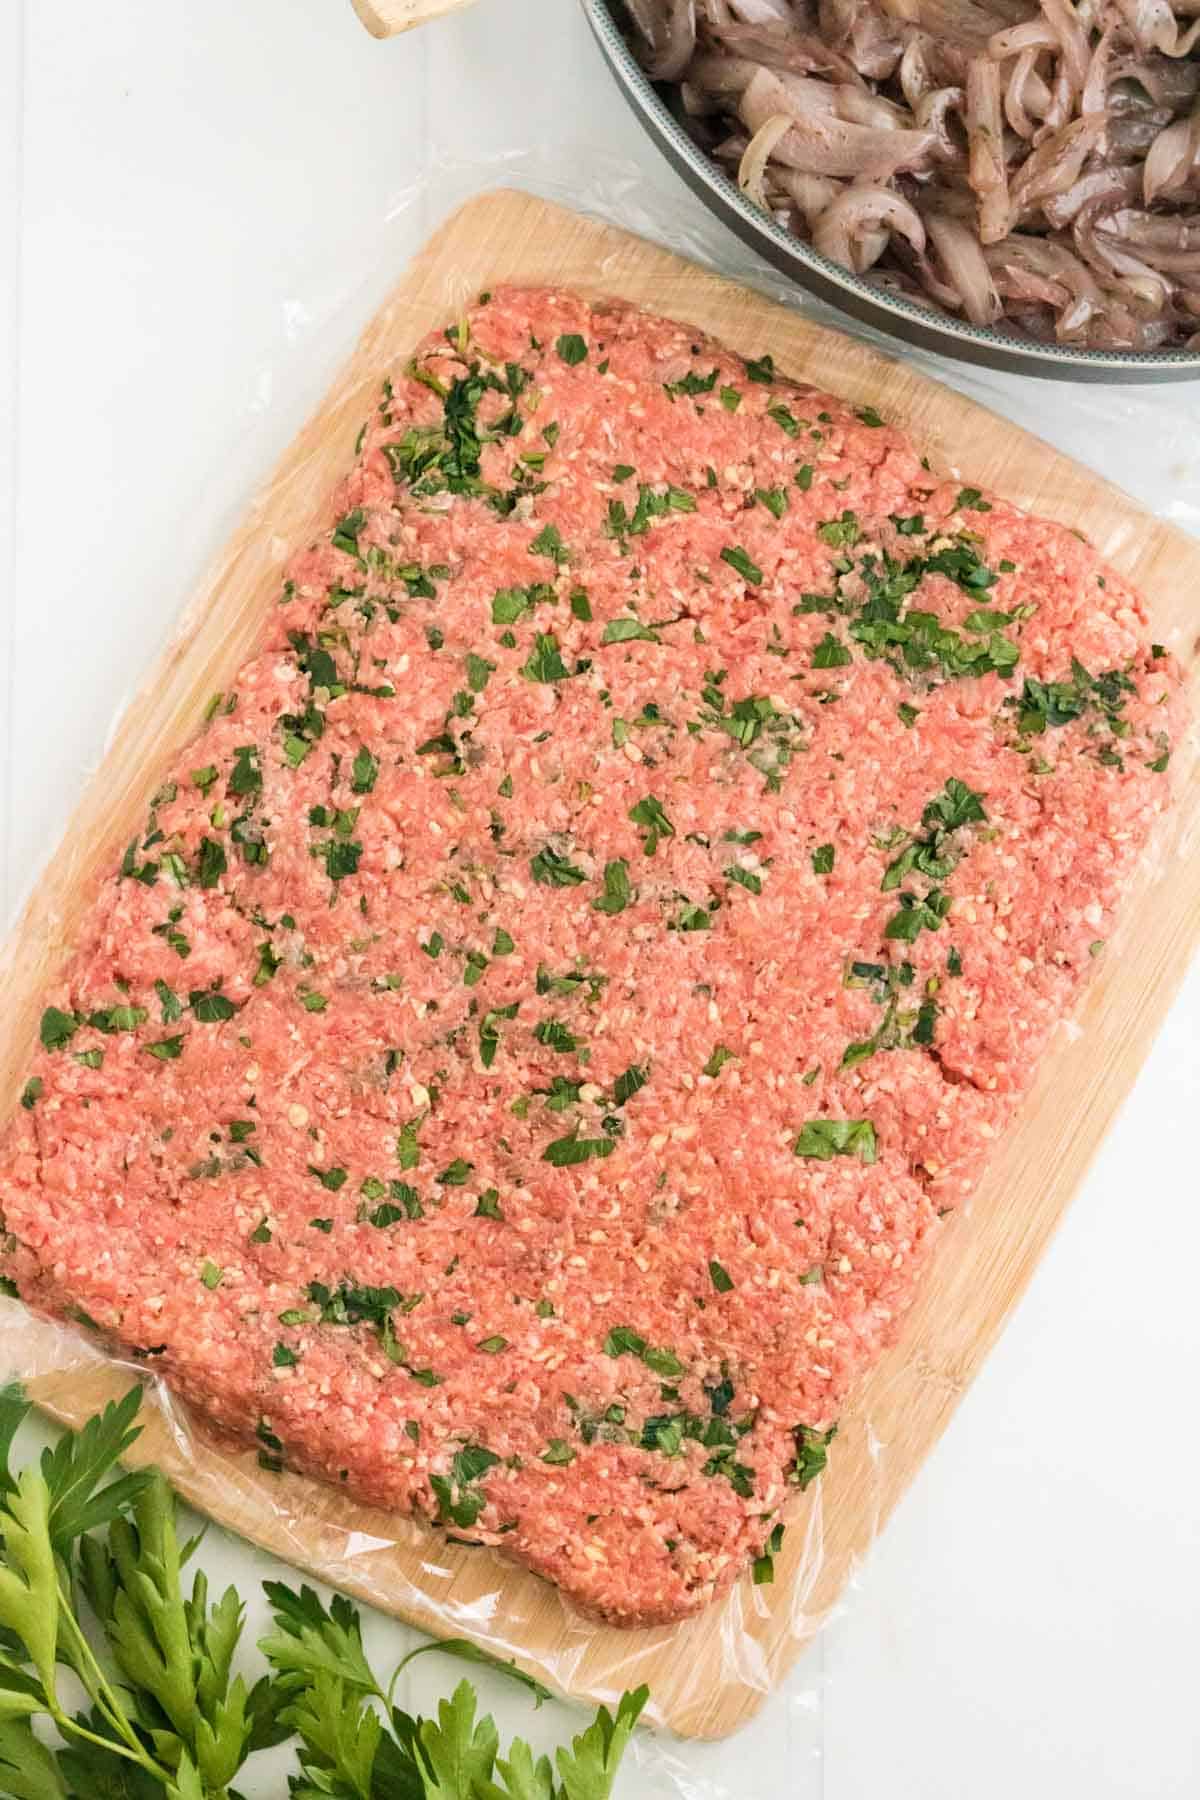 The meatloaf mixture in the shape of a rectangle on top of a cutting board lined with plastic wrap